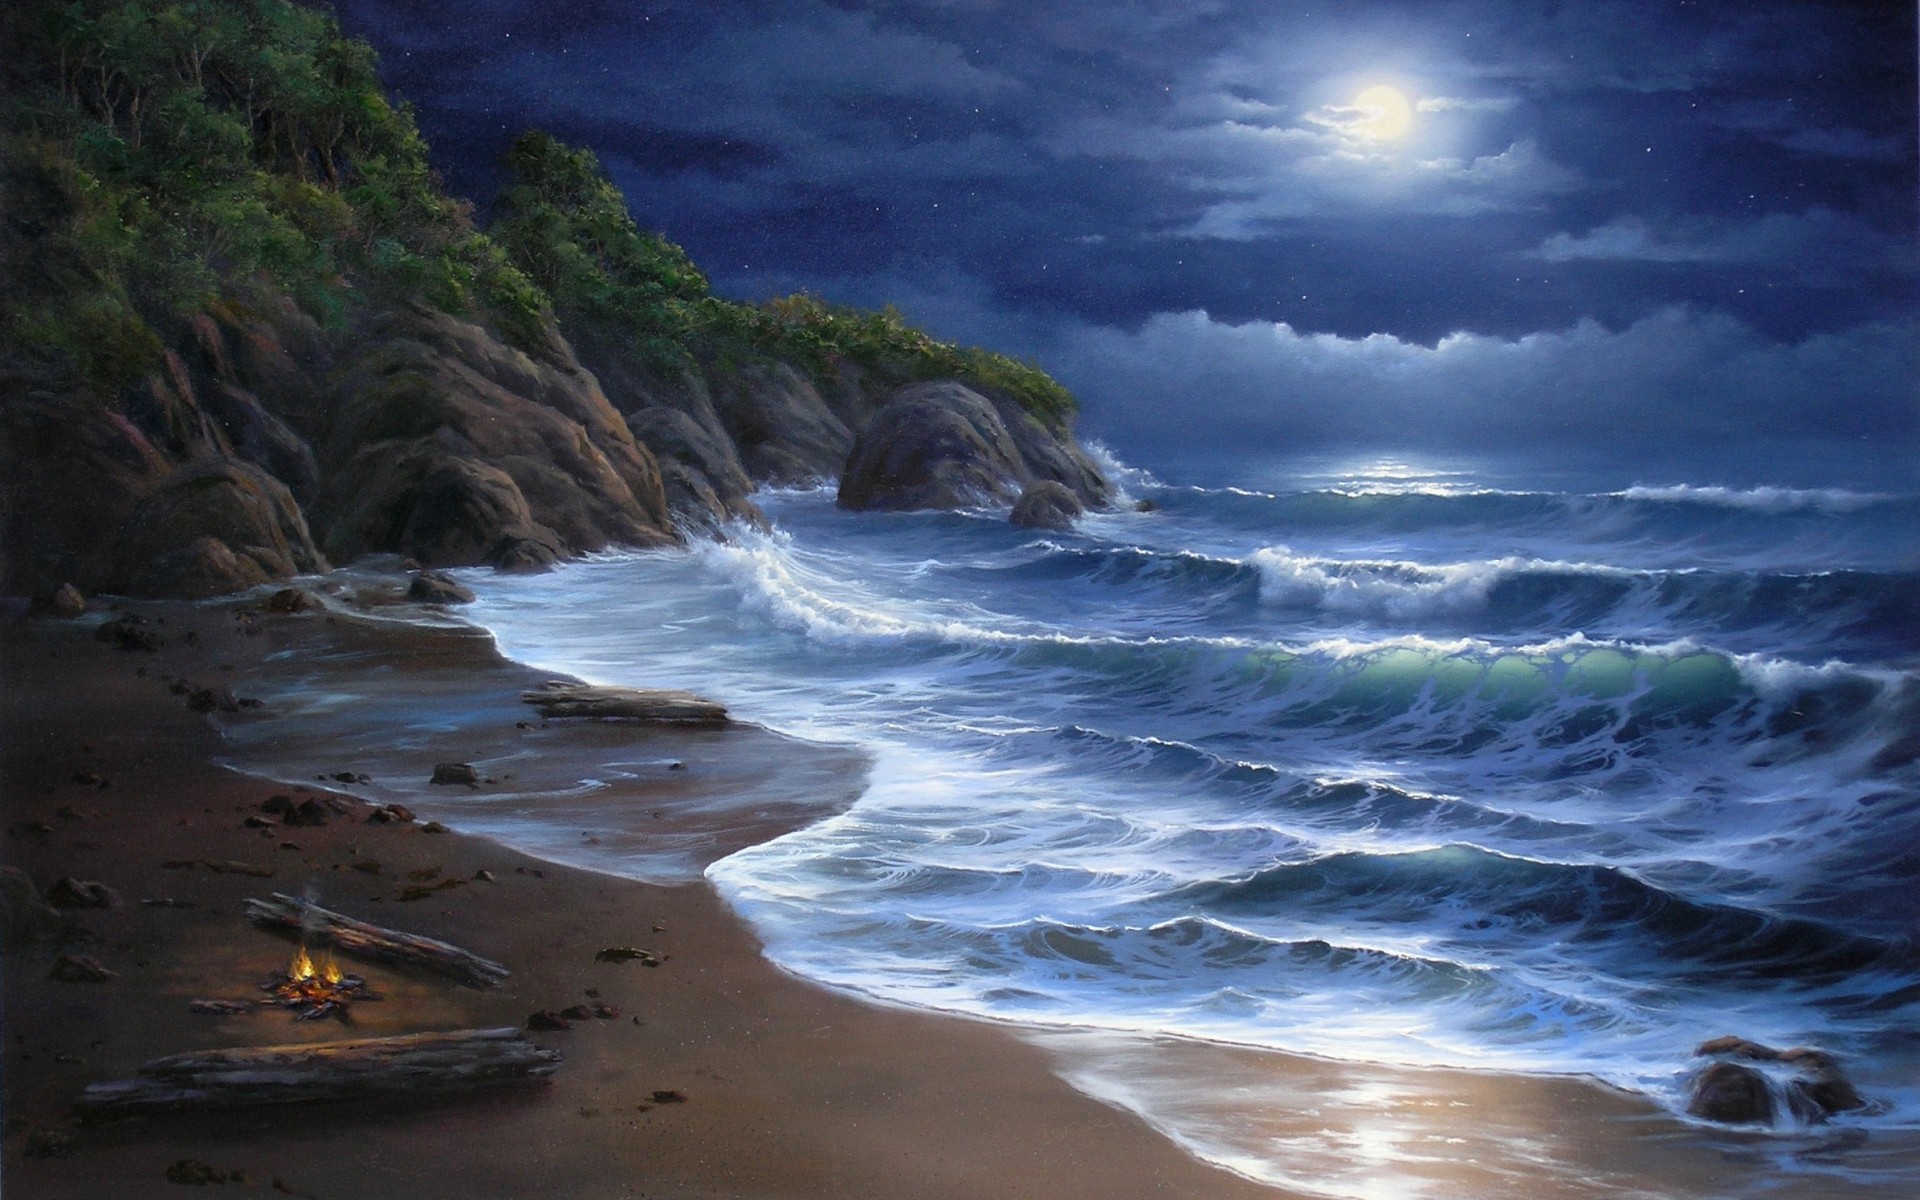 nature, Beaches, Landscapes, Waves, Ocean, Sea, Seascape, Cliff, Trees, Tropical, Sky, Clouds, Moon, Moonlight, Art, Artistic, Paintings Wallpaper